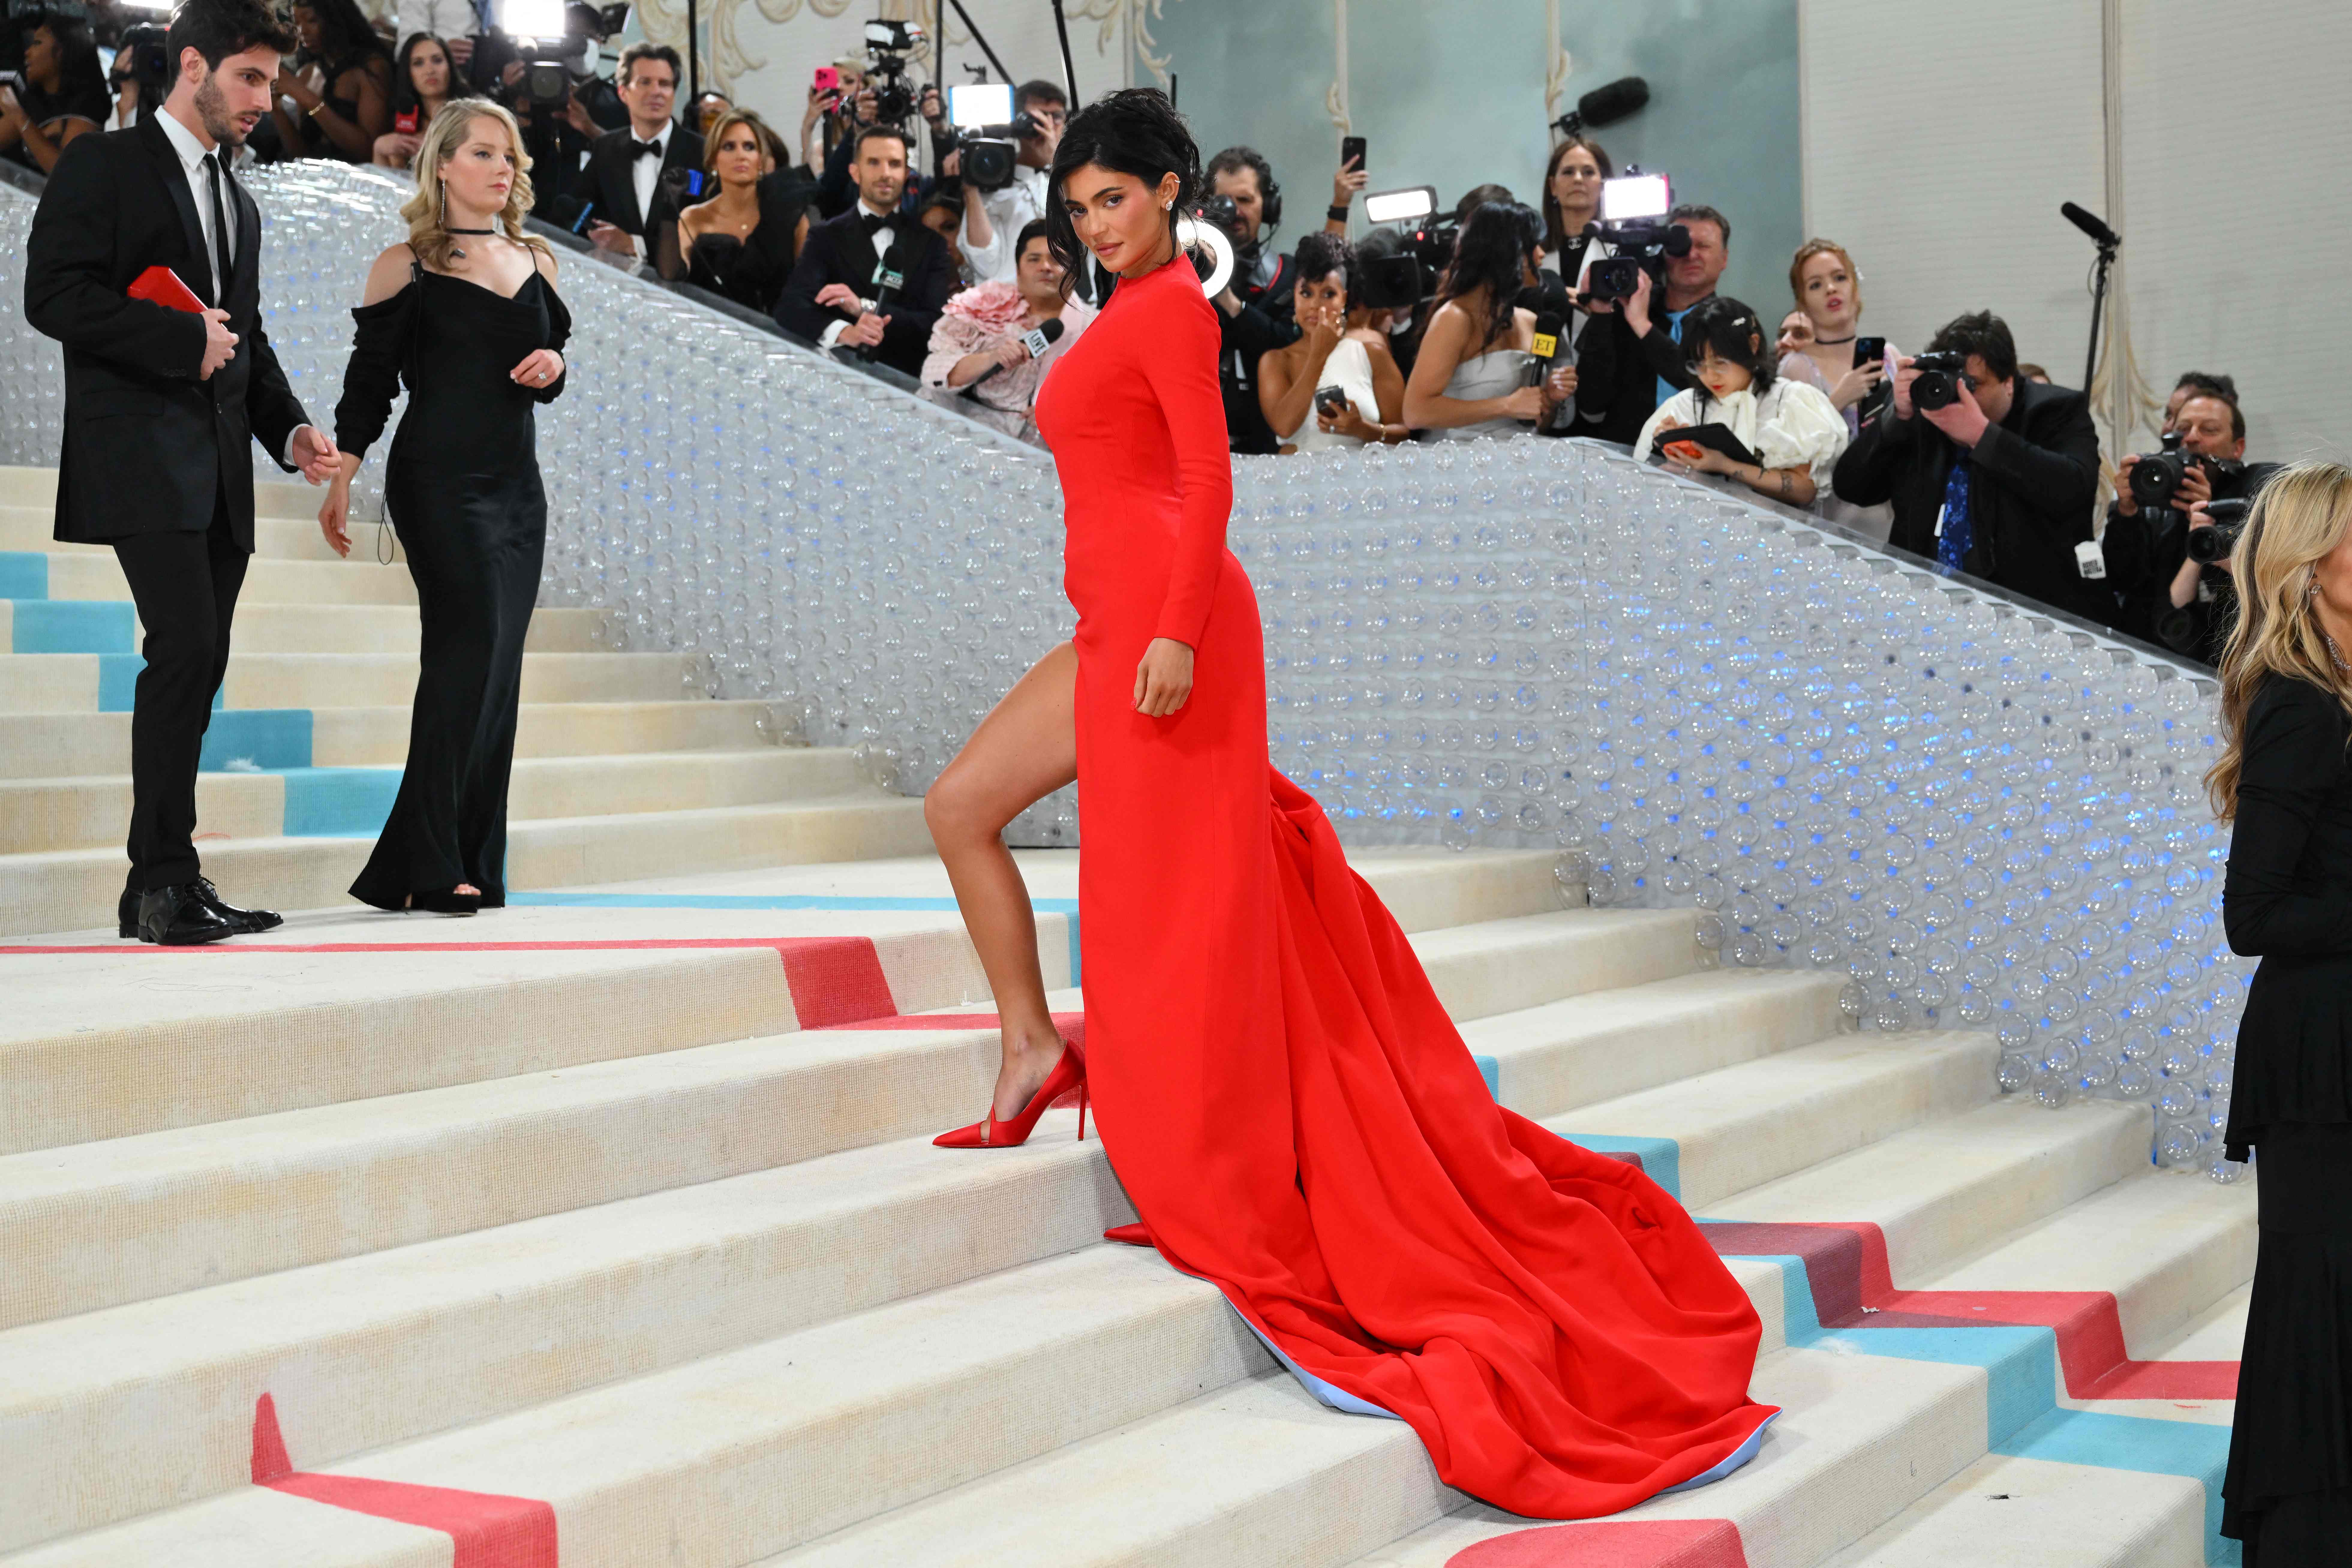 American model Kylie Jenner attended the event wearing a red dress — Photo: AFP